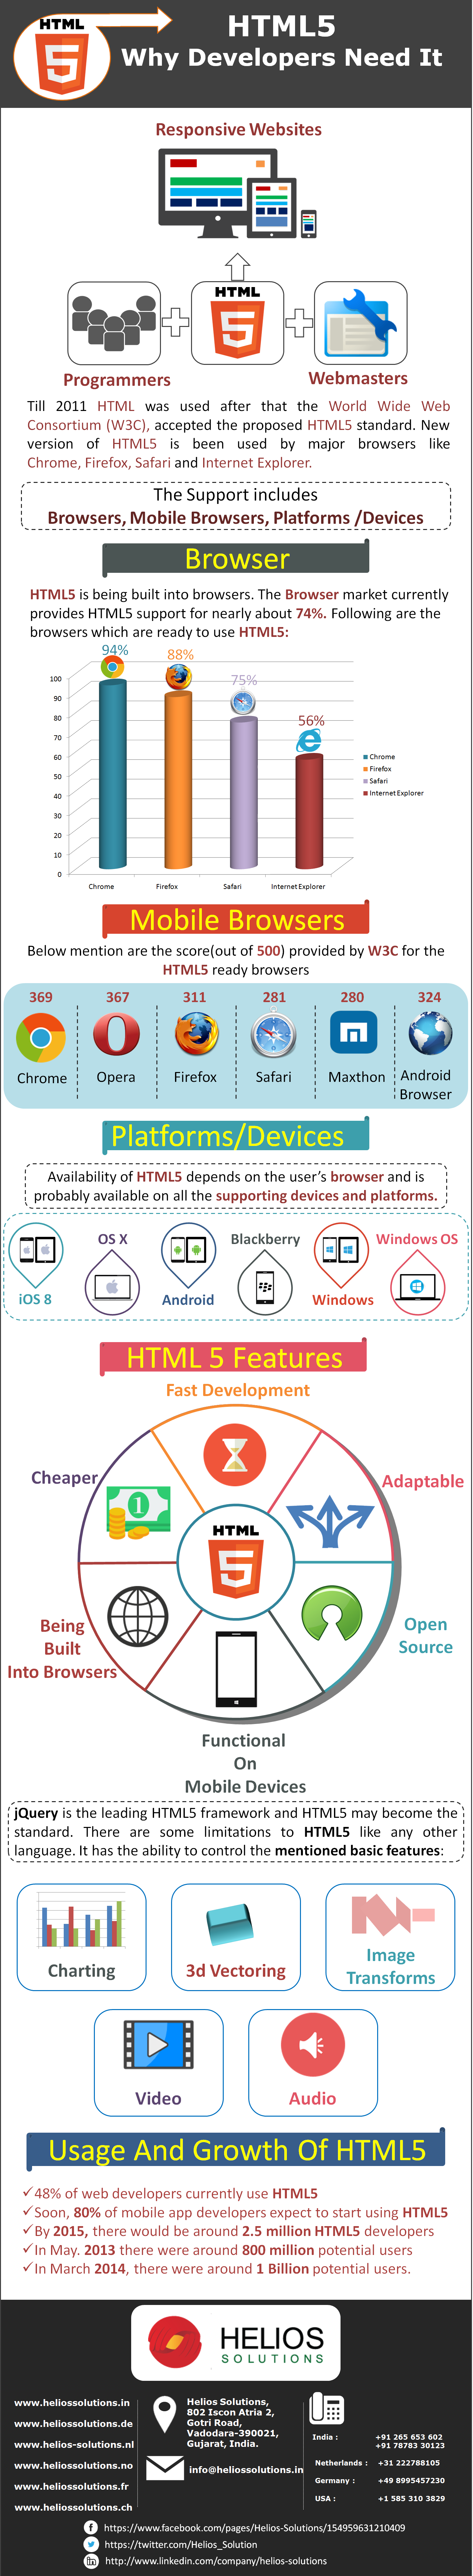 HTML5 Why Developers Need It